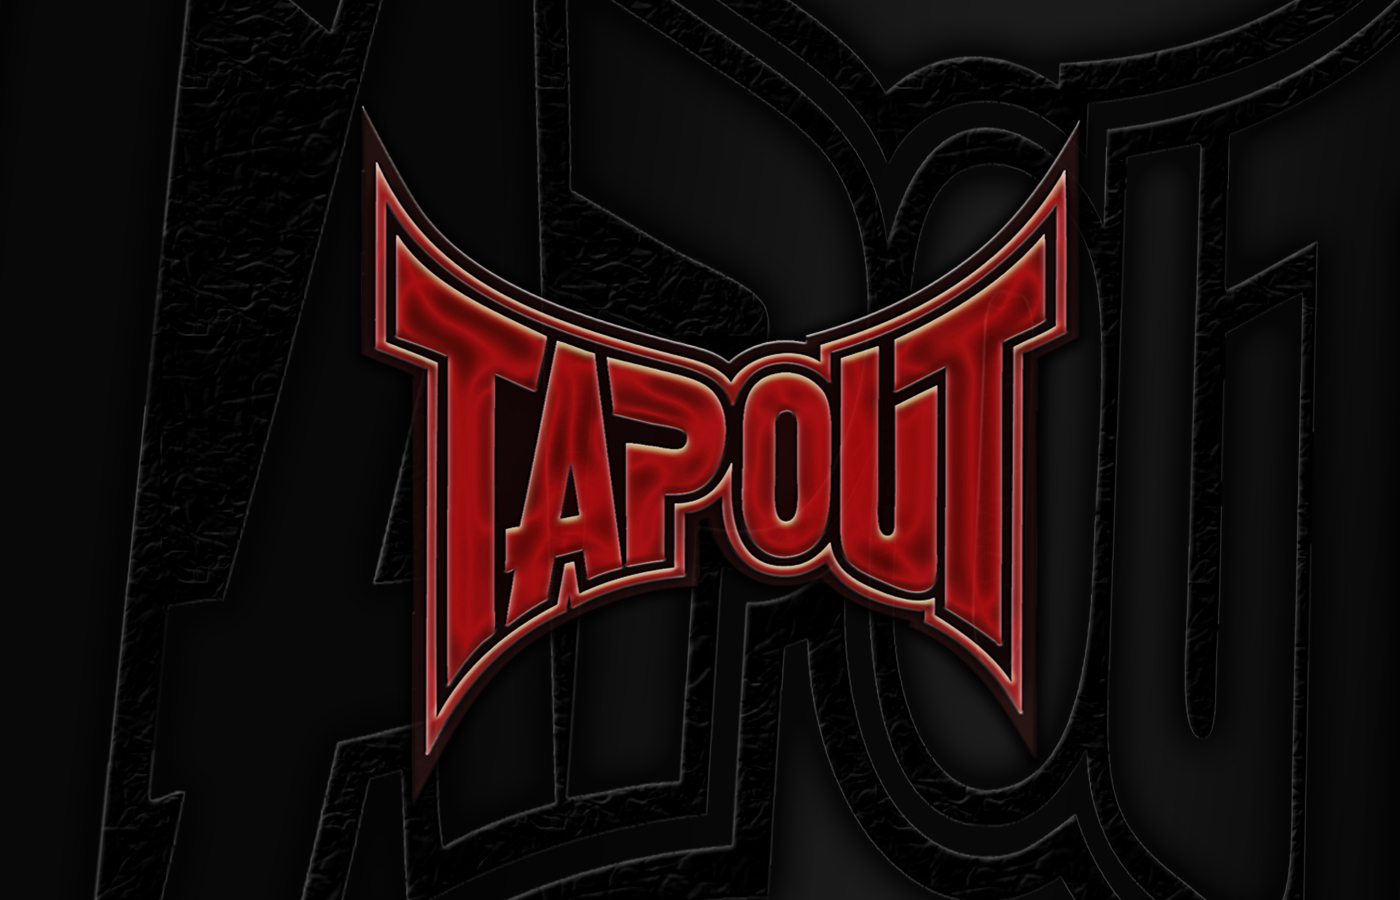 Tapout Wallpaper Background